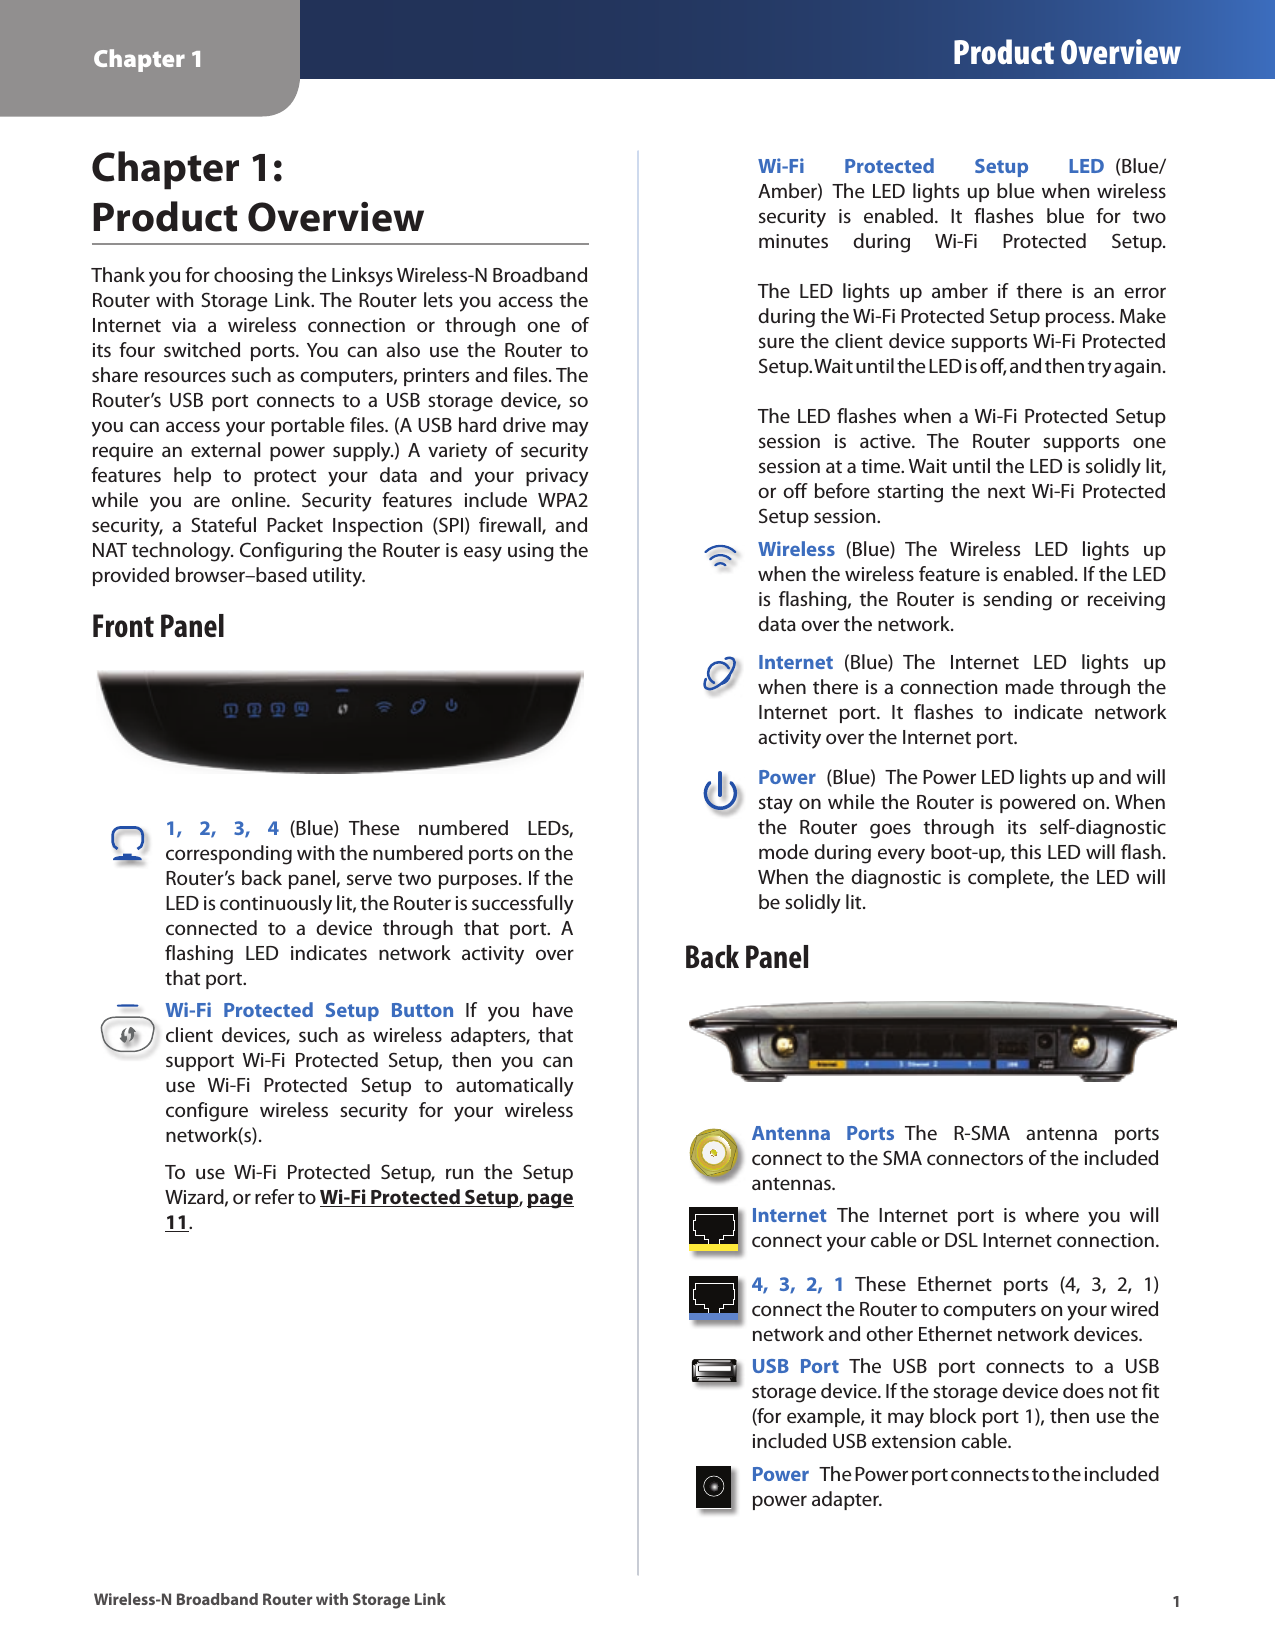 Chapter 1 Product Overview1Wireless-N Broadband Router with Storage LinkChapter 1:  Product OverviewThank you for choosing the Linksys Wireless-N Broadband Router with Storage Link. The Router lets you access the Internet  via  a  wireless  connection  or  through  one  of its  four  switched  ports.  You  can  also  use  the  Router  to share resources such as computers, printers and files. The Router’s  USB  port  connects  to a  USB  storage  device,  so you can access your portable files. (A USB hard drive may require  an  external  power  supply.)  A  variety  of  security features  help  to  protect  your  data  and  your  privacy while  you  are  online.  Security  features  include  WPA2 security,  a  Stateful  Packet  Inspection  (SPI)  firewall,  and NAT technology. Configuring the Router is easy using the provided browser–based utility.Front Panel1,  2,  3,  4  (Blue)  These  numbered  LEDs, corresponding with the numbered ports on the Router’s back panel, serve two purposes. If the LED is continuously lit, the Router is successfully connected  to  a  device  through  that  port.  A flashing  LED  indicates  network  activity  over that port. Wi-Fi  Protected  Setup  Button  If  you  have client  devices,  such  as  wireless  adapters,  that support  Wi-Fi  Protected  Setup,  then  you  can use  Wi-Fi  Protected  Setup  to  automatically configure  wireless  security  for  your  wireless network(s).To  use  Wi-Fi  Protected  Setup,  run  the  Setup Wizard, or refer to Wi-Fi Protected Setup, page 11.Wi-Fi  Protected  Setup  LED  (Blue/Amber)  The LED lights up blue when wireless security  is  enabled.  It  flashes  blue  for  two minutes  during  Wi-Fi  Protected  Setup.    The  LED  lights  up  amber  if  there  is  an  error during the Wi-Fi Protected Setup process. Make sure the client device supports Wi-Fi Protected Setup. Wait until the LED is off, and then try again.   The LED flashes when a Wi-Fi Protected Setup session  is  active.  The  Router  supports  one session at a time. Wait until the LED is solidly lit, or off before starting the  next Wi-Fi Protected Setup session.Wireless  (Blue)  The  Wireless  LED  lights  up when the wireless feature is enabled. If the LED is  flashing,  the  Router  is  sending  or  receiving data over the network.Internet  (Blue)  The  Internet  LED  lights  up when there is a connection made through the Internet  port.  It  flashes  to  indicate  network activity over the Internet port. Power  (Blue)  The Power LED lights up and will stay on while the Router is powered on. When the  Router  goes  through  its  self-diagnostic mode during every boot-up, this LED will flash. When the diagnostic is complete, the LED will be solidly lit.Back PanelAntenna  Ports  The  R-SMA  antenna  ports connect to the SMA connectors of the included antennas.Internet  The  Internet  port  is  where  you  will connect your cable or DSL Internet connection. 4,  3,  2,  1  These  Ethernet  ports  (4,  3,  2,  1) connect the Router to computers on your wired network and other Ethernet network devices. USB  Port  The  USB  port  connects  to  a  USB storage device. If the storage device does not fit (for example, it may block port 1), then use the included USB extension cable.Power  The Power port connects to the included power adapter.